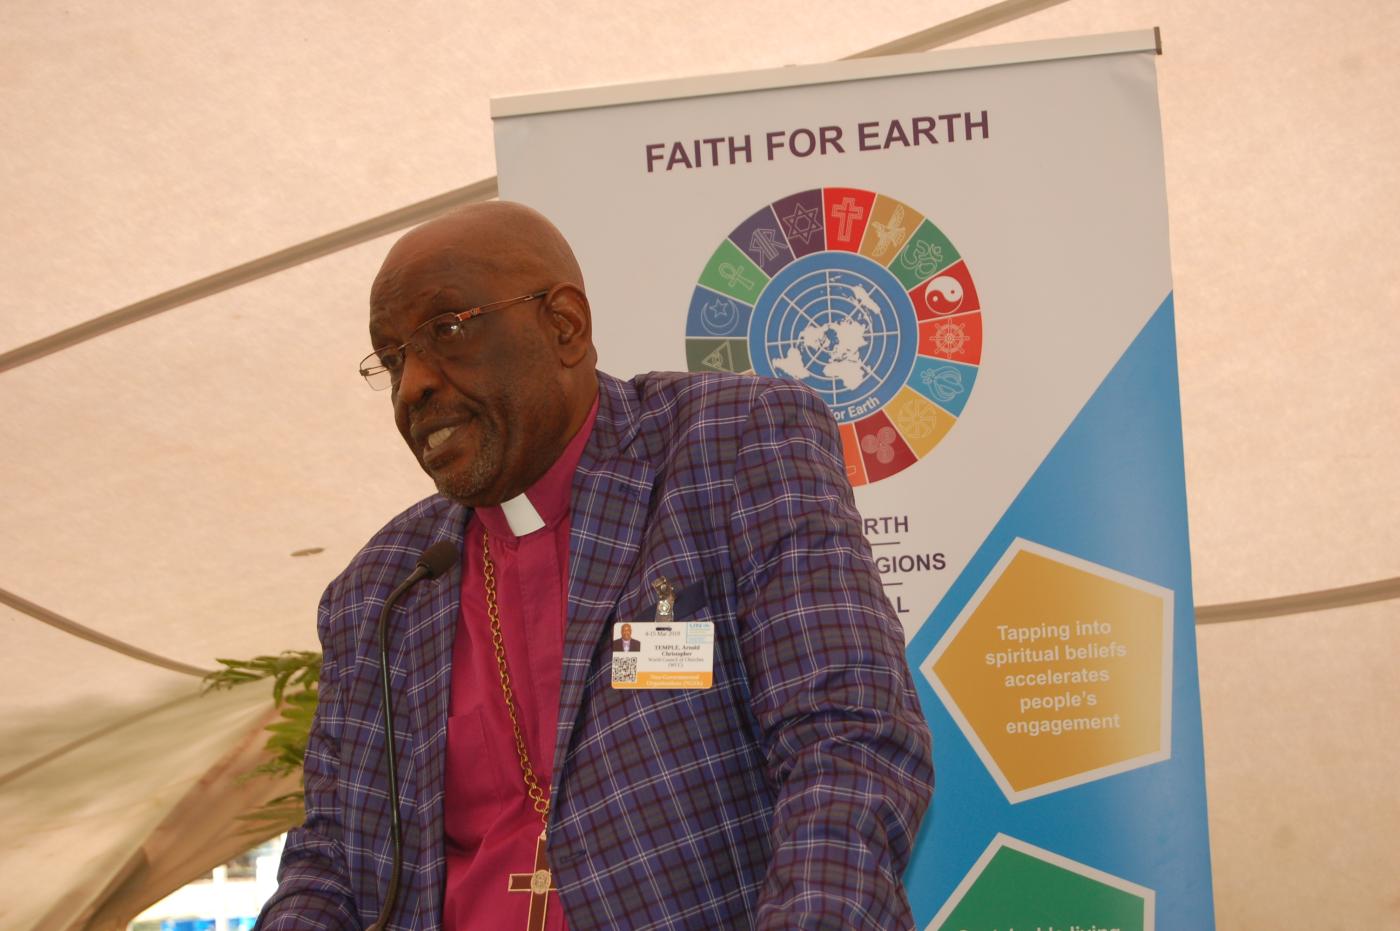 Bishop Arnold Temple, the President of the All Africa Conference of Churches (AACC), speaks on March 11 during a faith leaders side event dubbed faith for earth at the U.N Environmental Assembly in Nairobi. Photo: Fredrick Nzwili